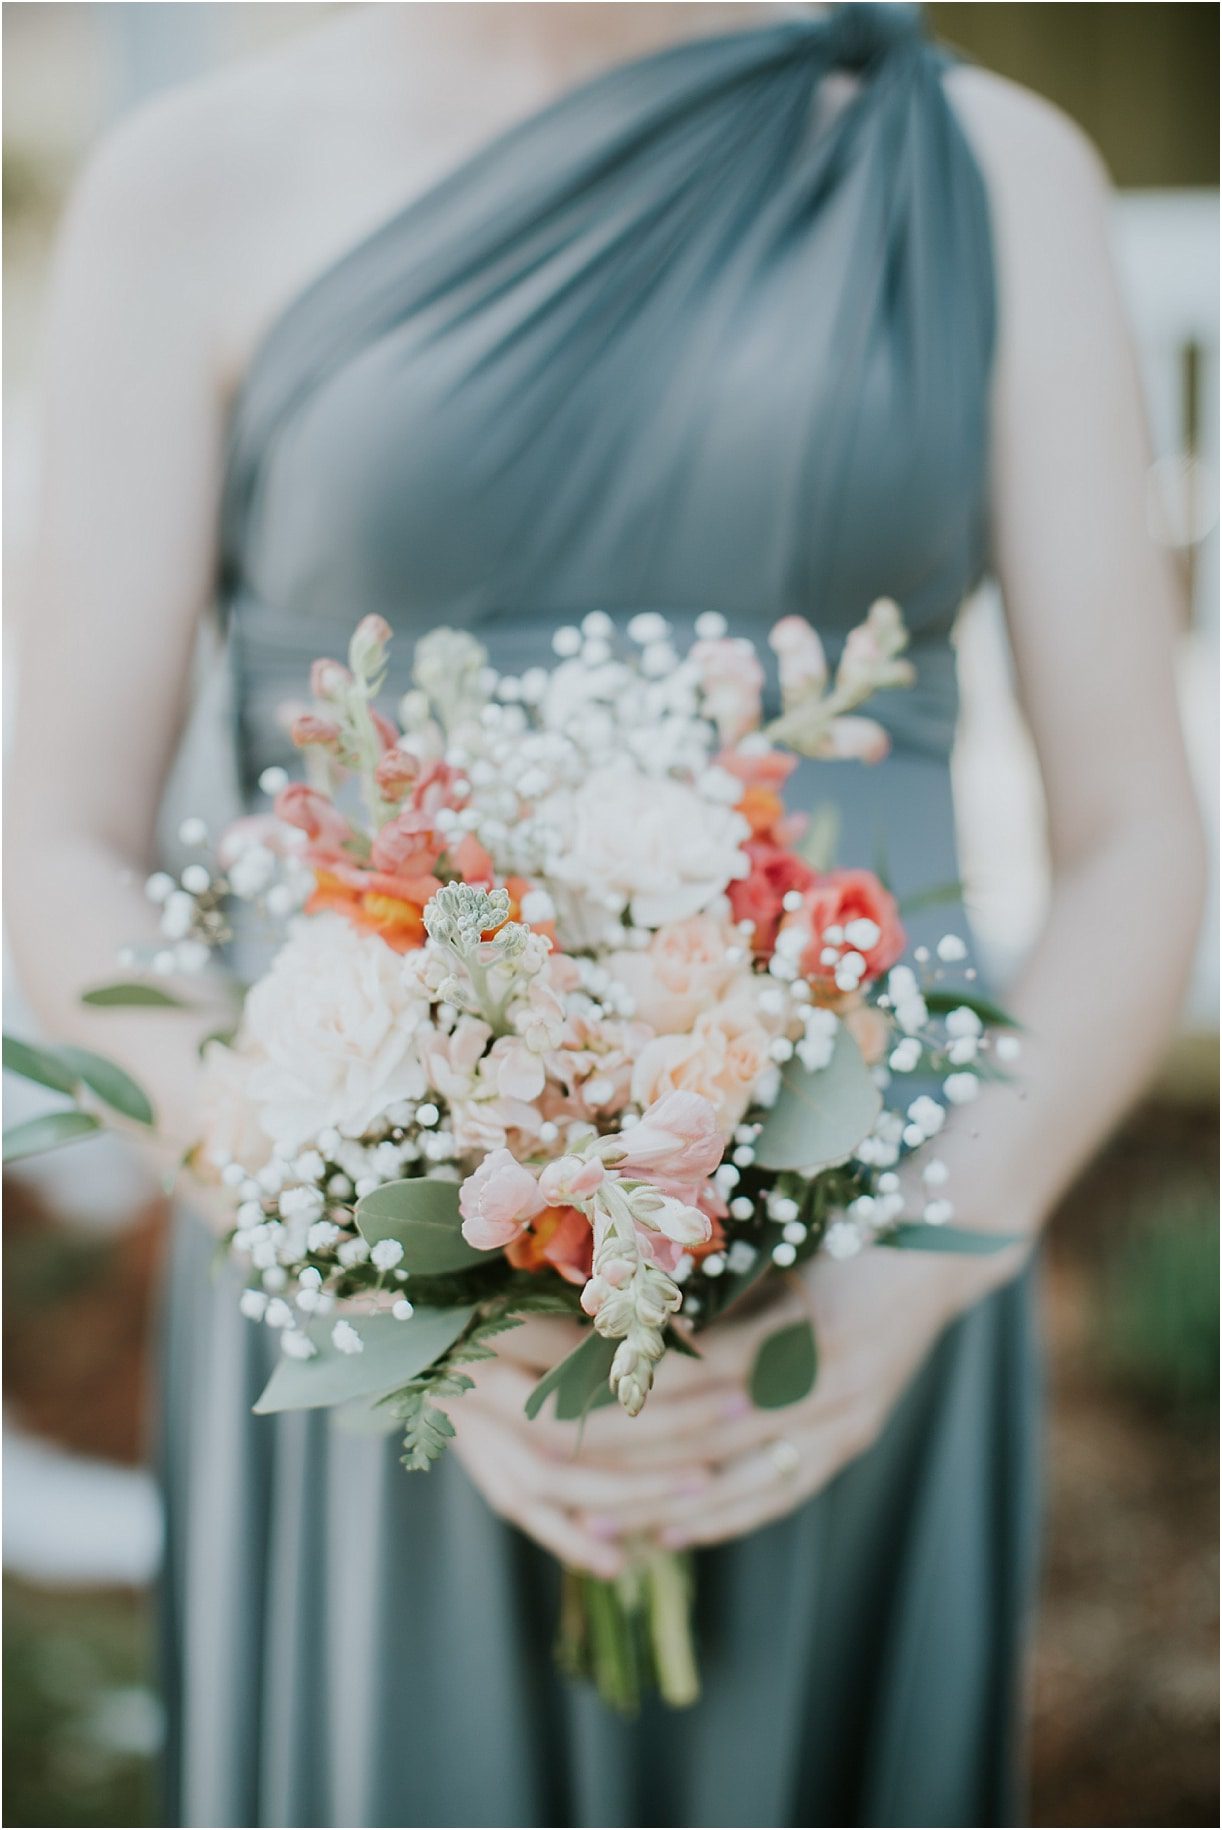 Lovely Virginia Vineyard Wedding as seen on Hill City Bride Blog by Vness Photography - bouquet